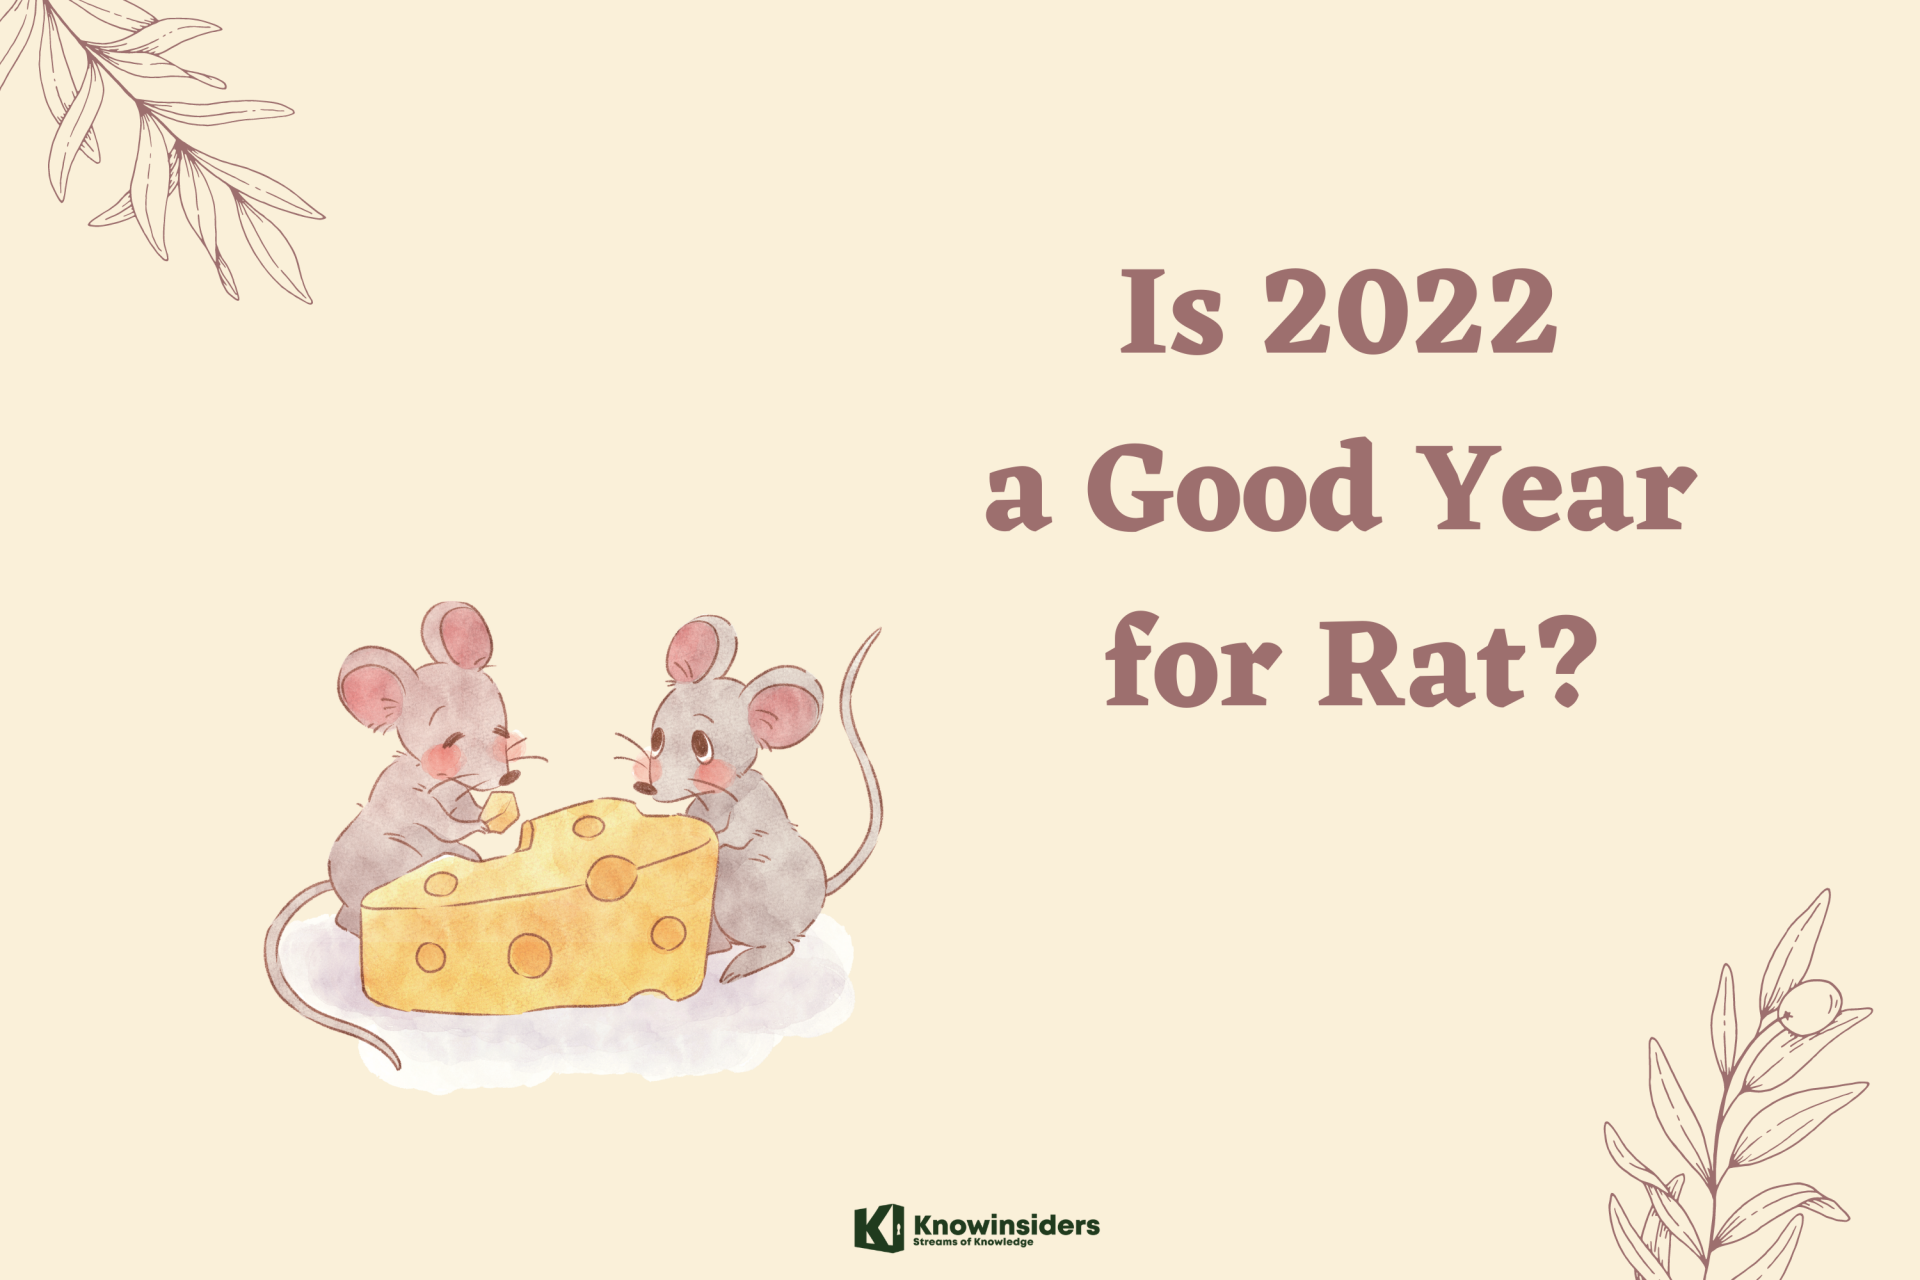 Is 2022 a Good Year for Rat?